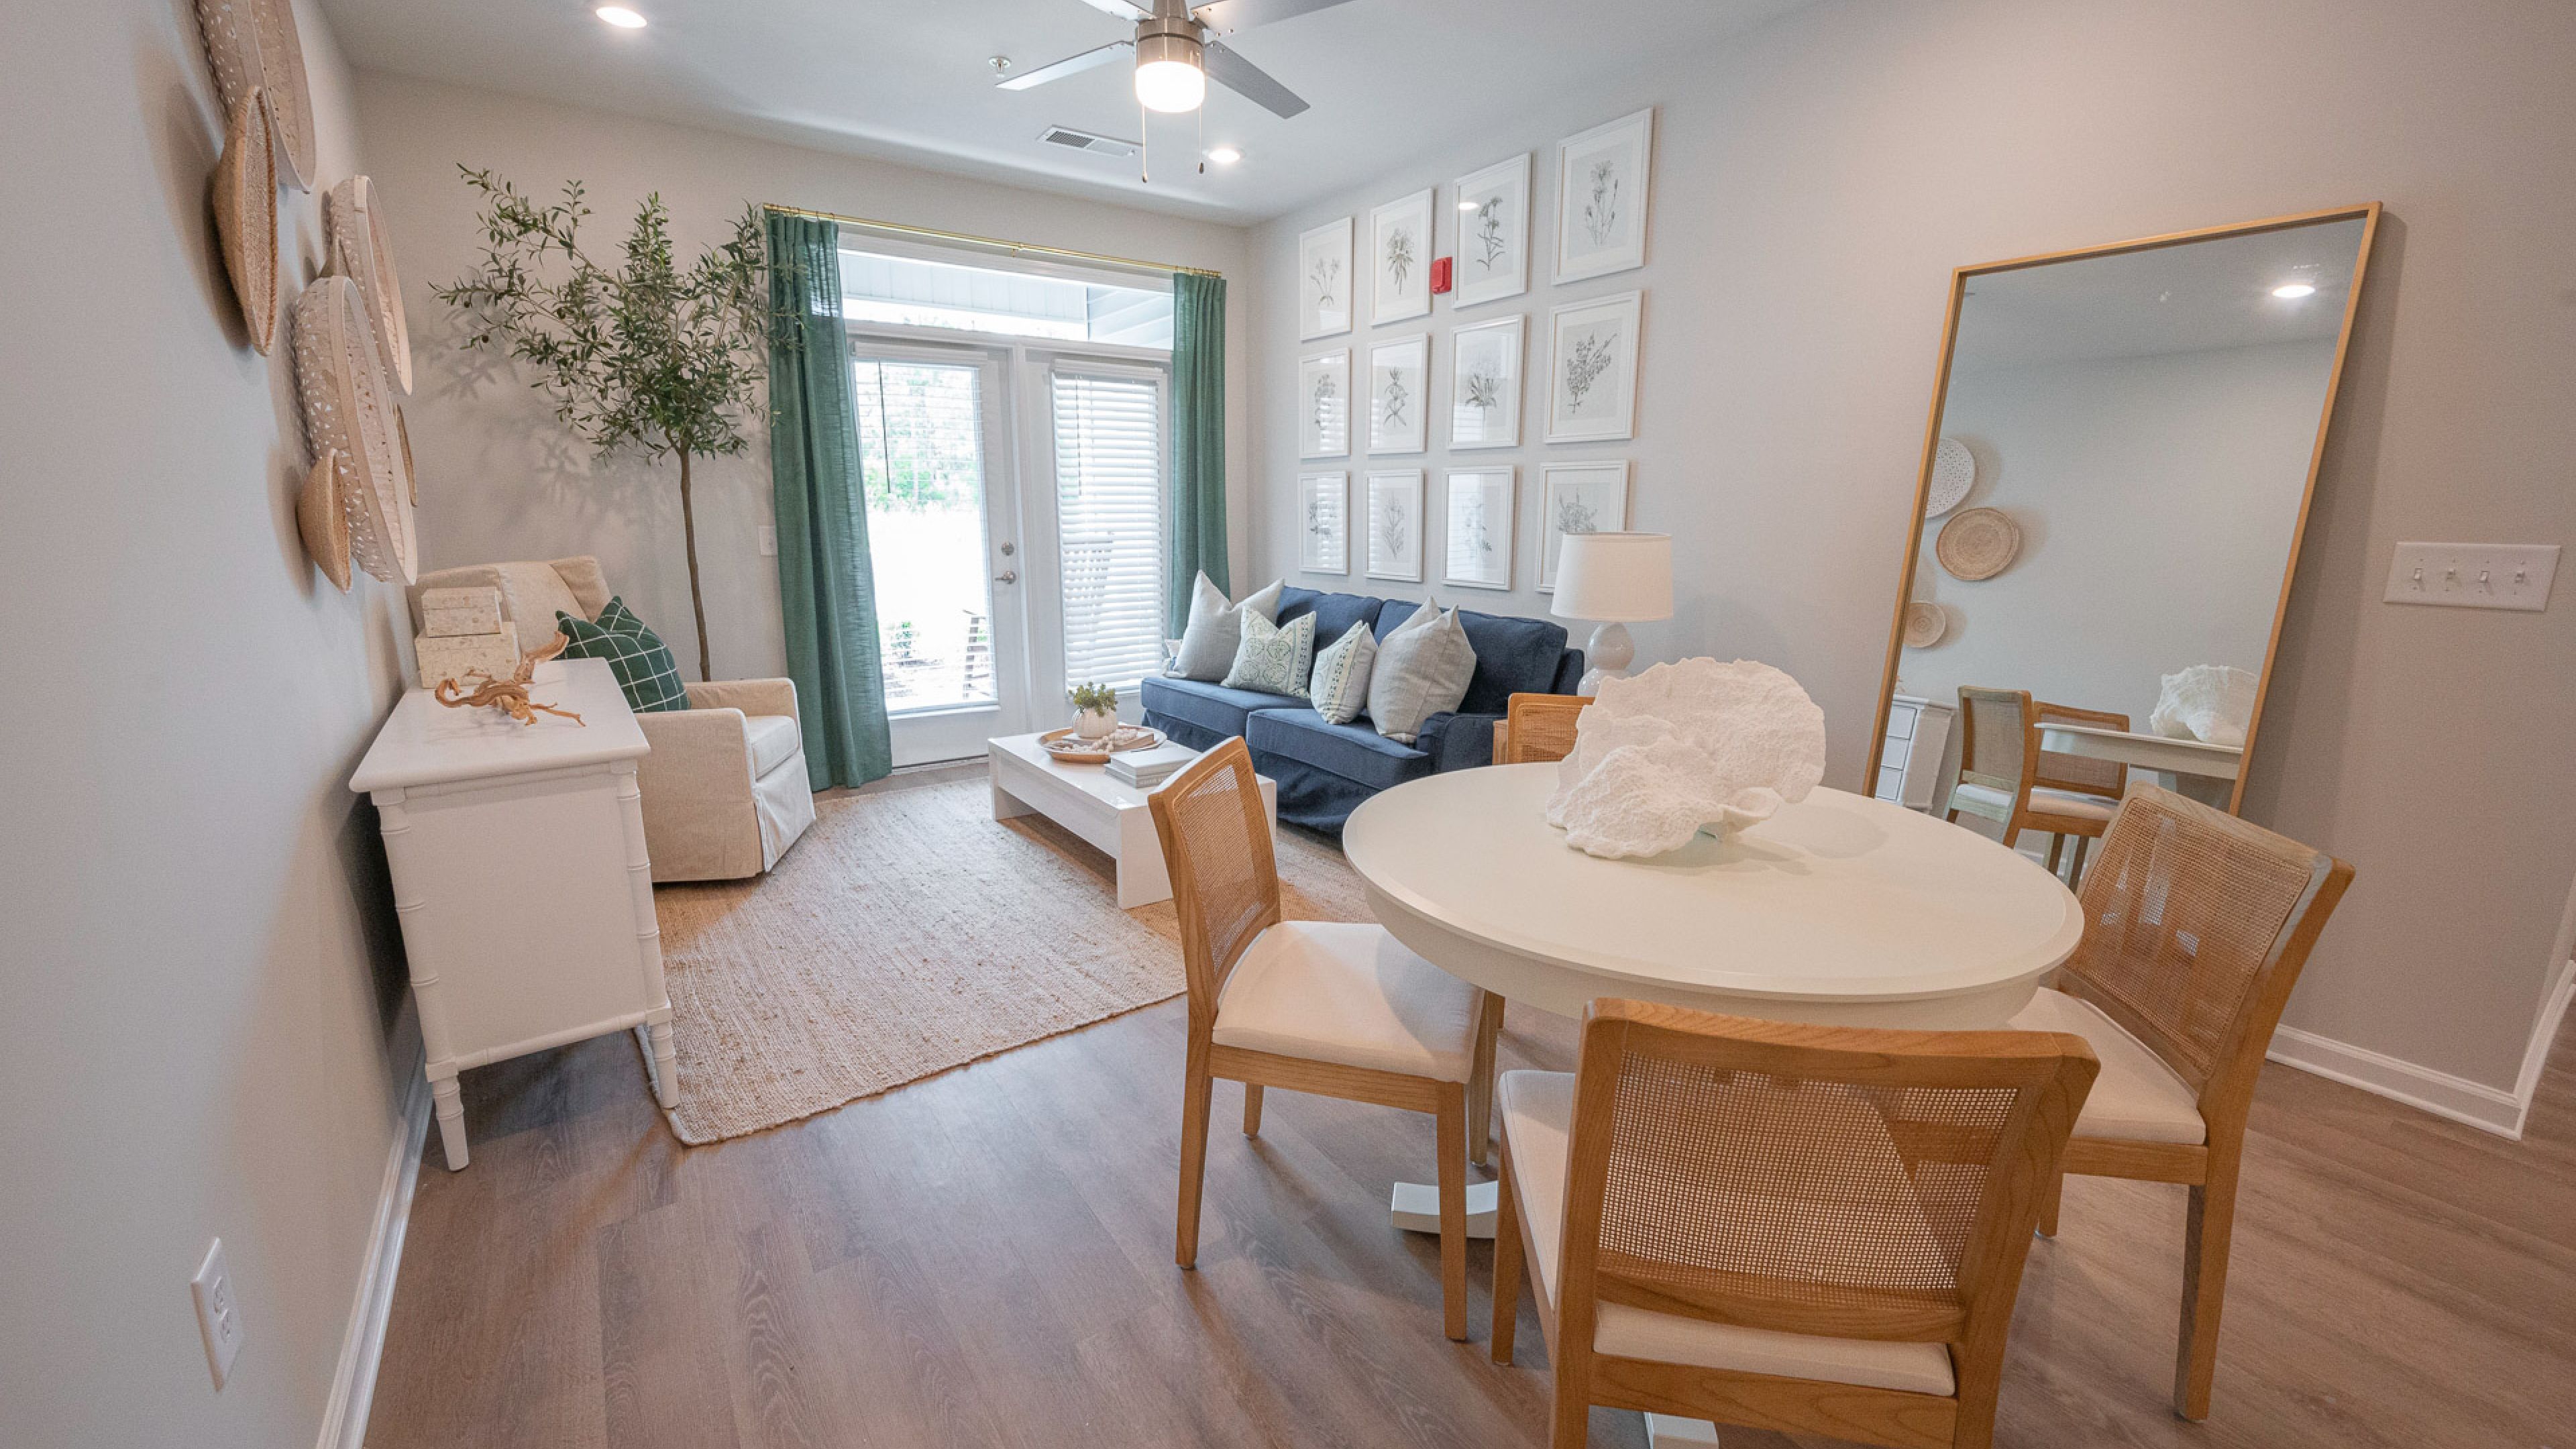 Hawthorne Waterside cozy living space with a plush sofa, gallery wall of white frames, and a round dining table set.